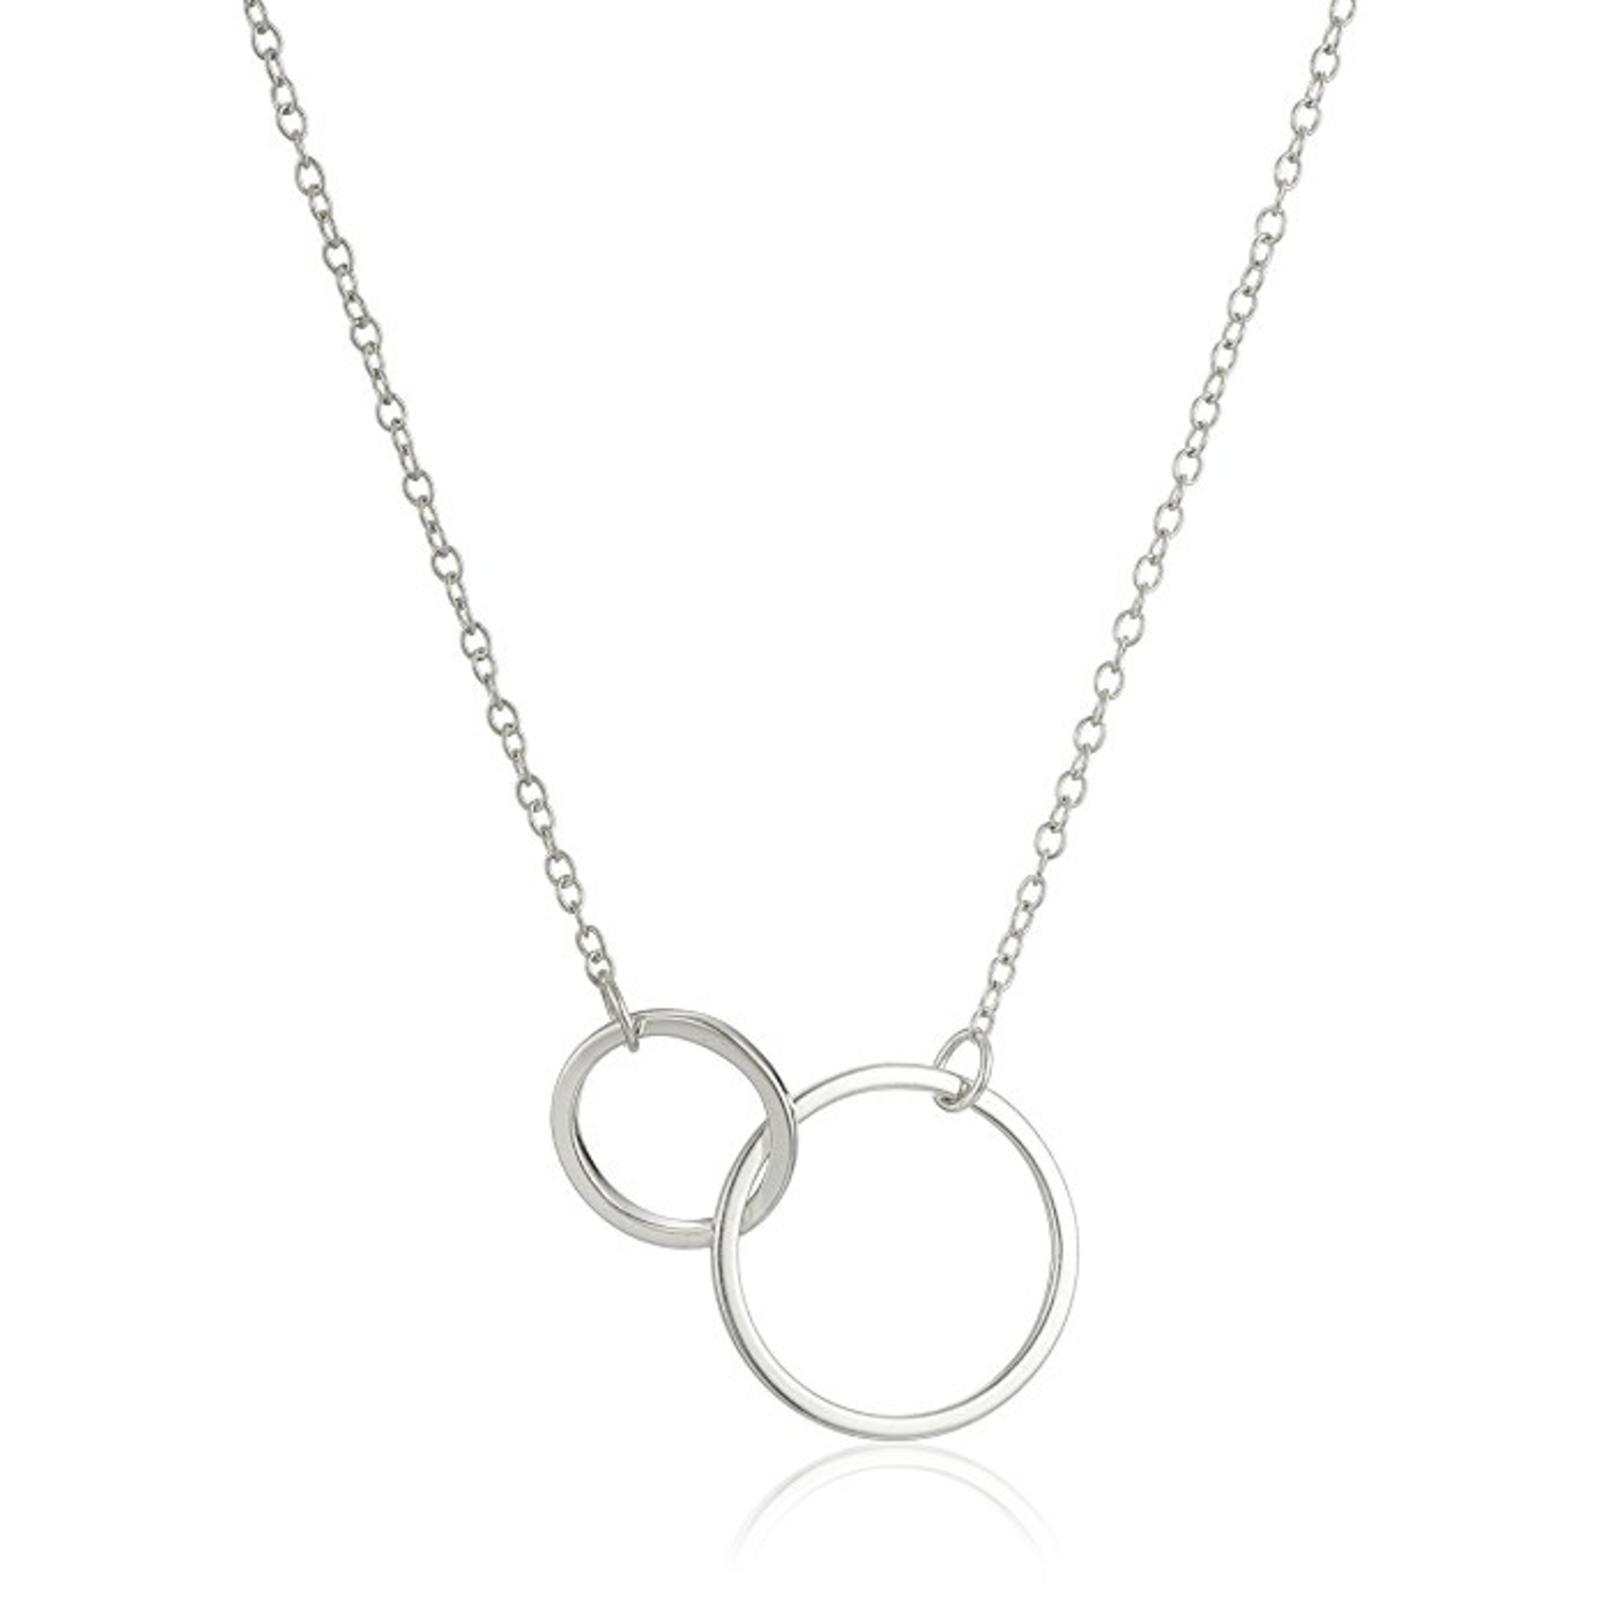 Sterling Silver with Two Circles Pendant Chain Necklace, 16" + 1" Extender